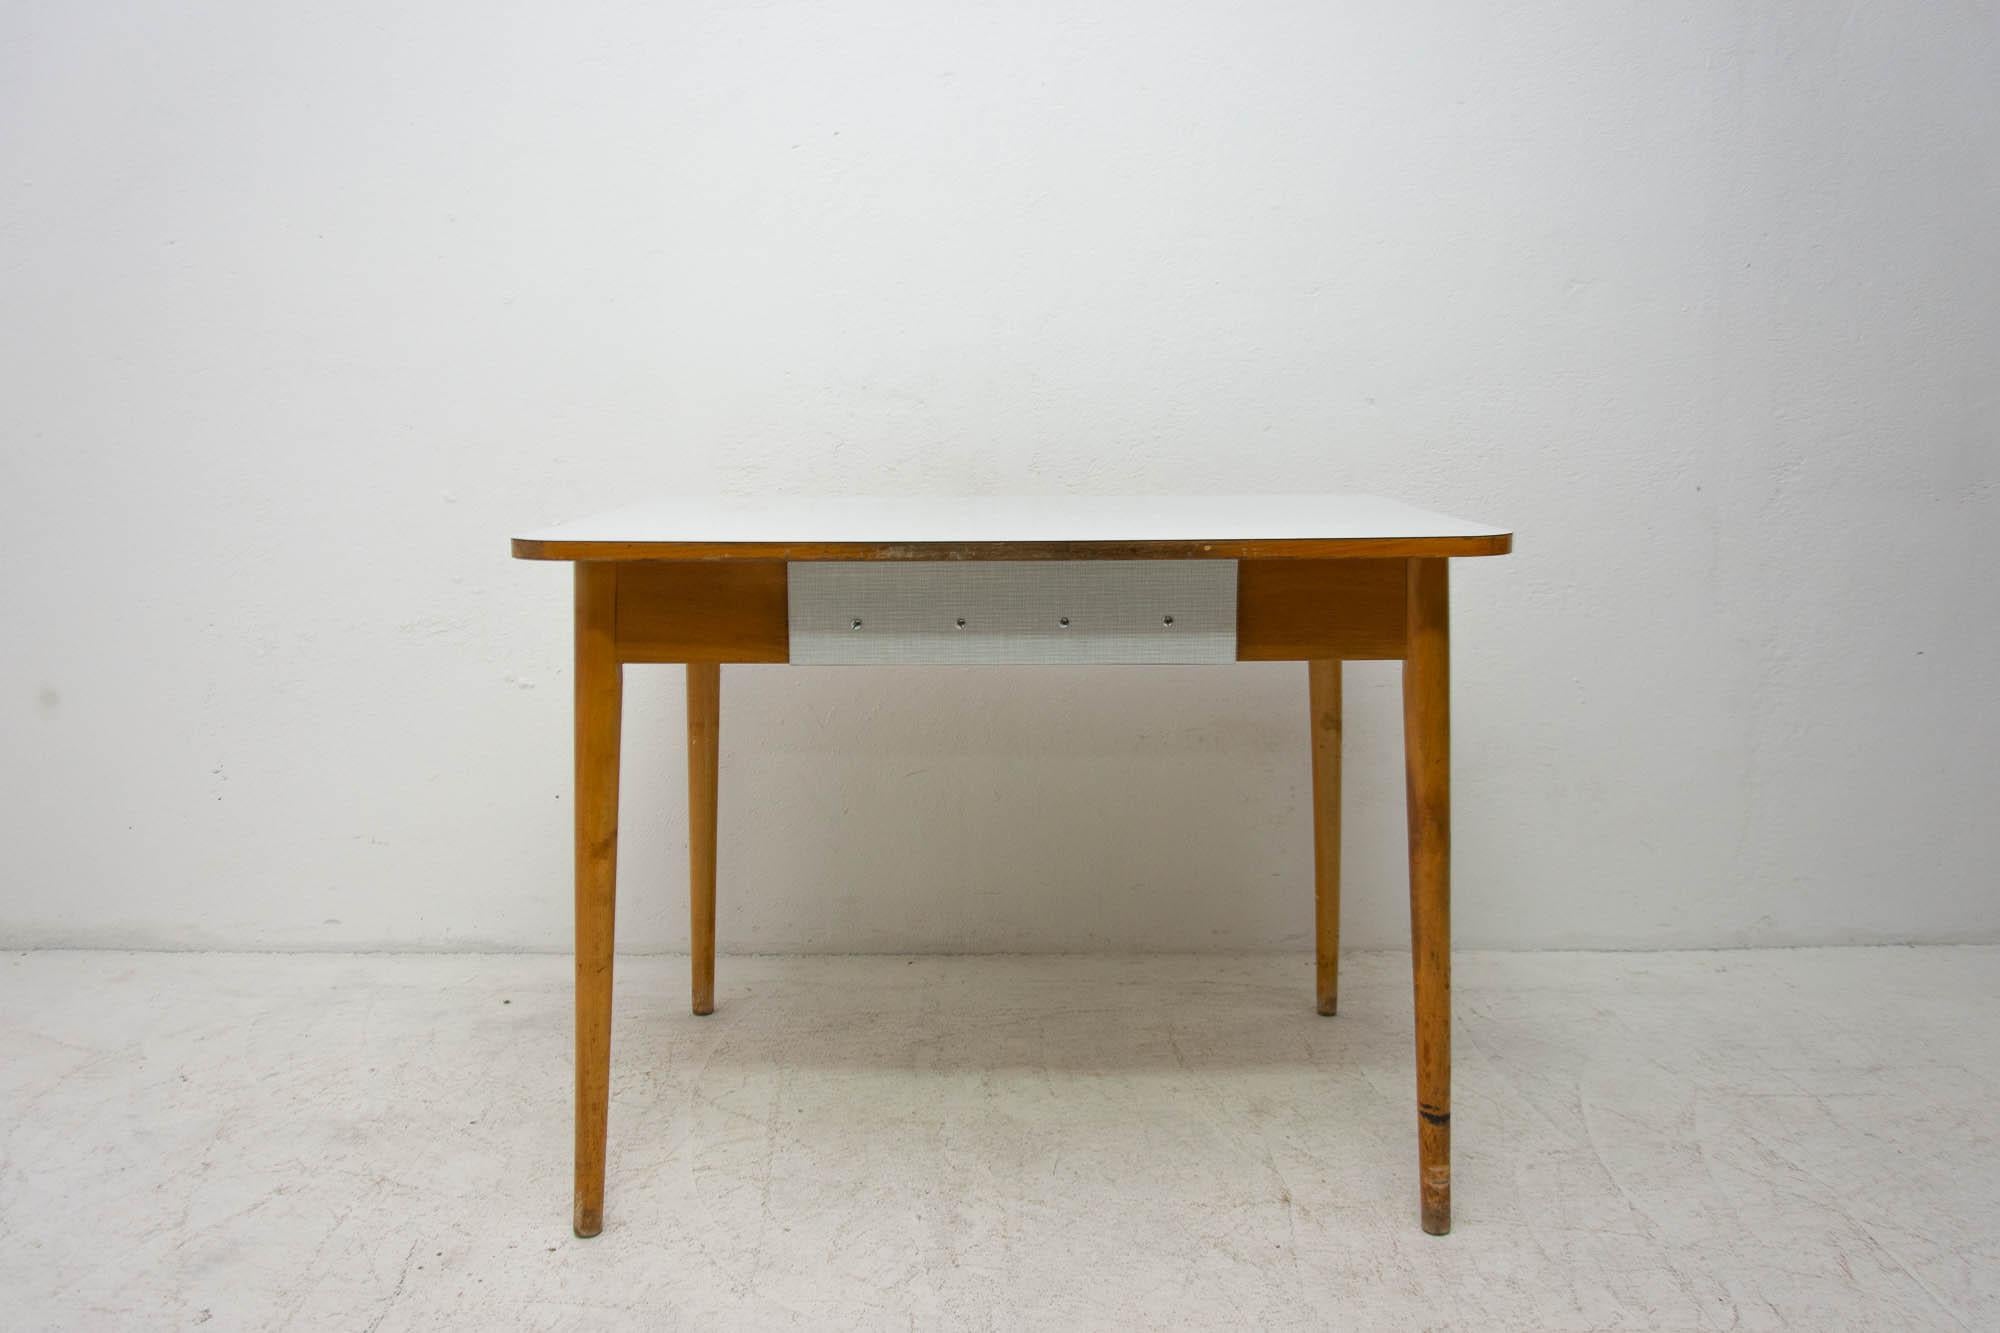 Midcentury kitchen table with a Formica plate, beech legs and one drawer. It was made in the former Czechoslovakia in the 1960s. In good vintage condition, the legs bear signs of age and using in the form of a few scratches.